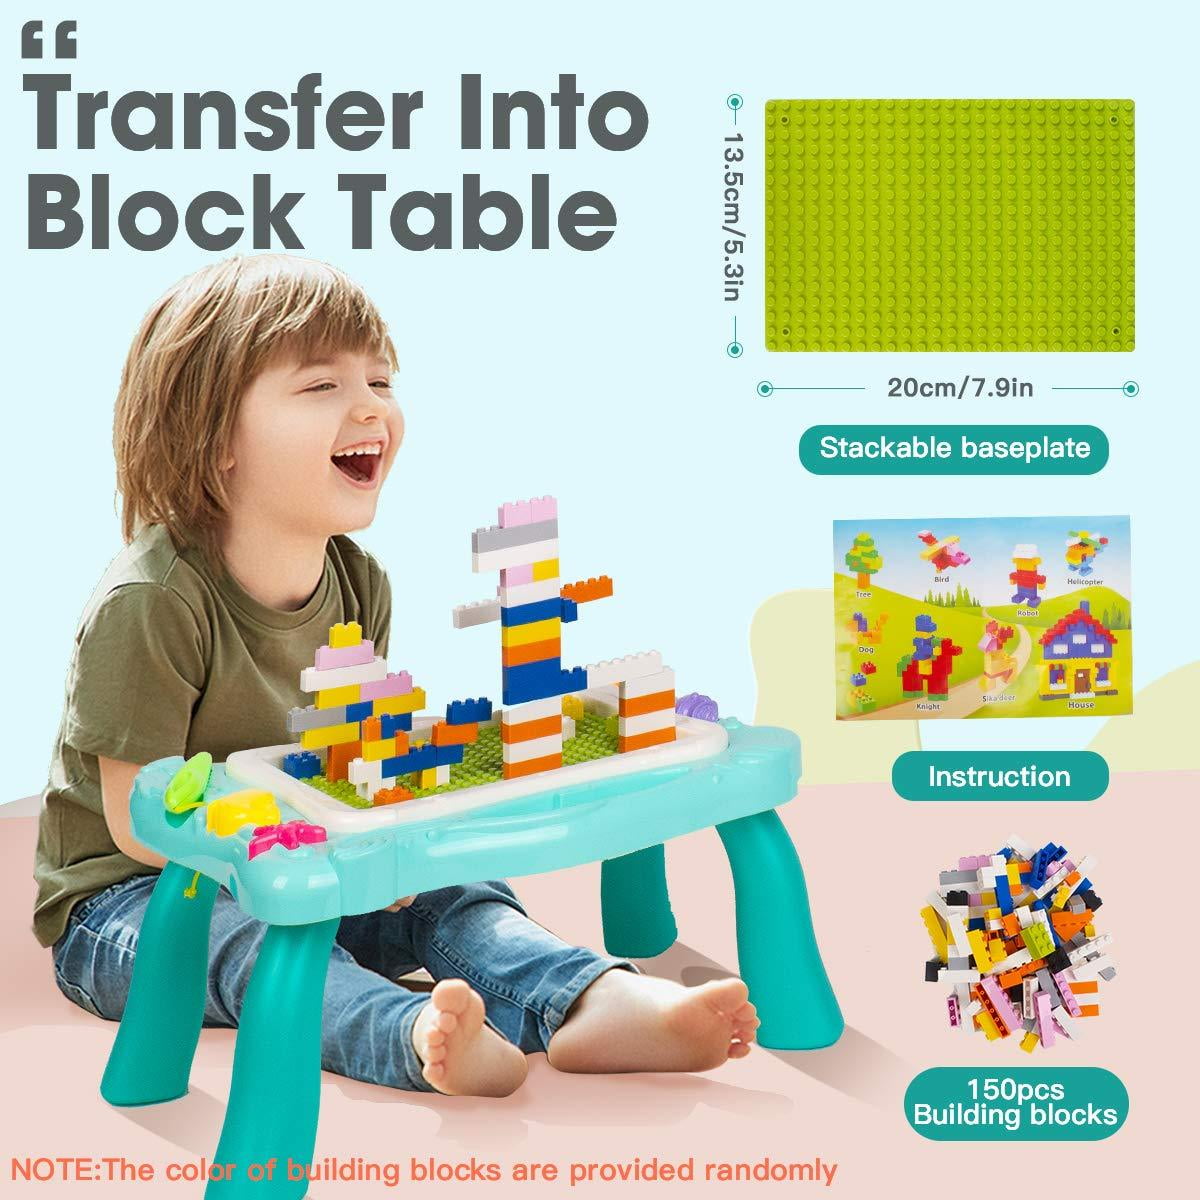 BUENAVO Kids Activity Table Set-2 in 1 Magnetic Drawing Board and Building Brick Table with 150pcs Bricks,Magnetic Colorful Writing Sketch Board Toys for 2 3 4 5 Year Old Boys Girls